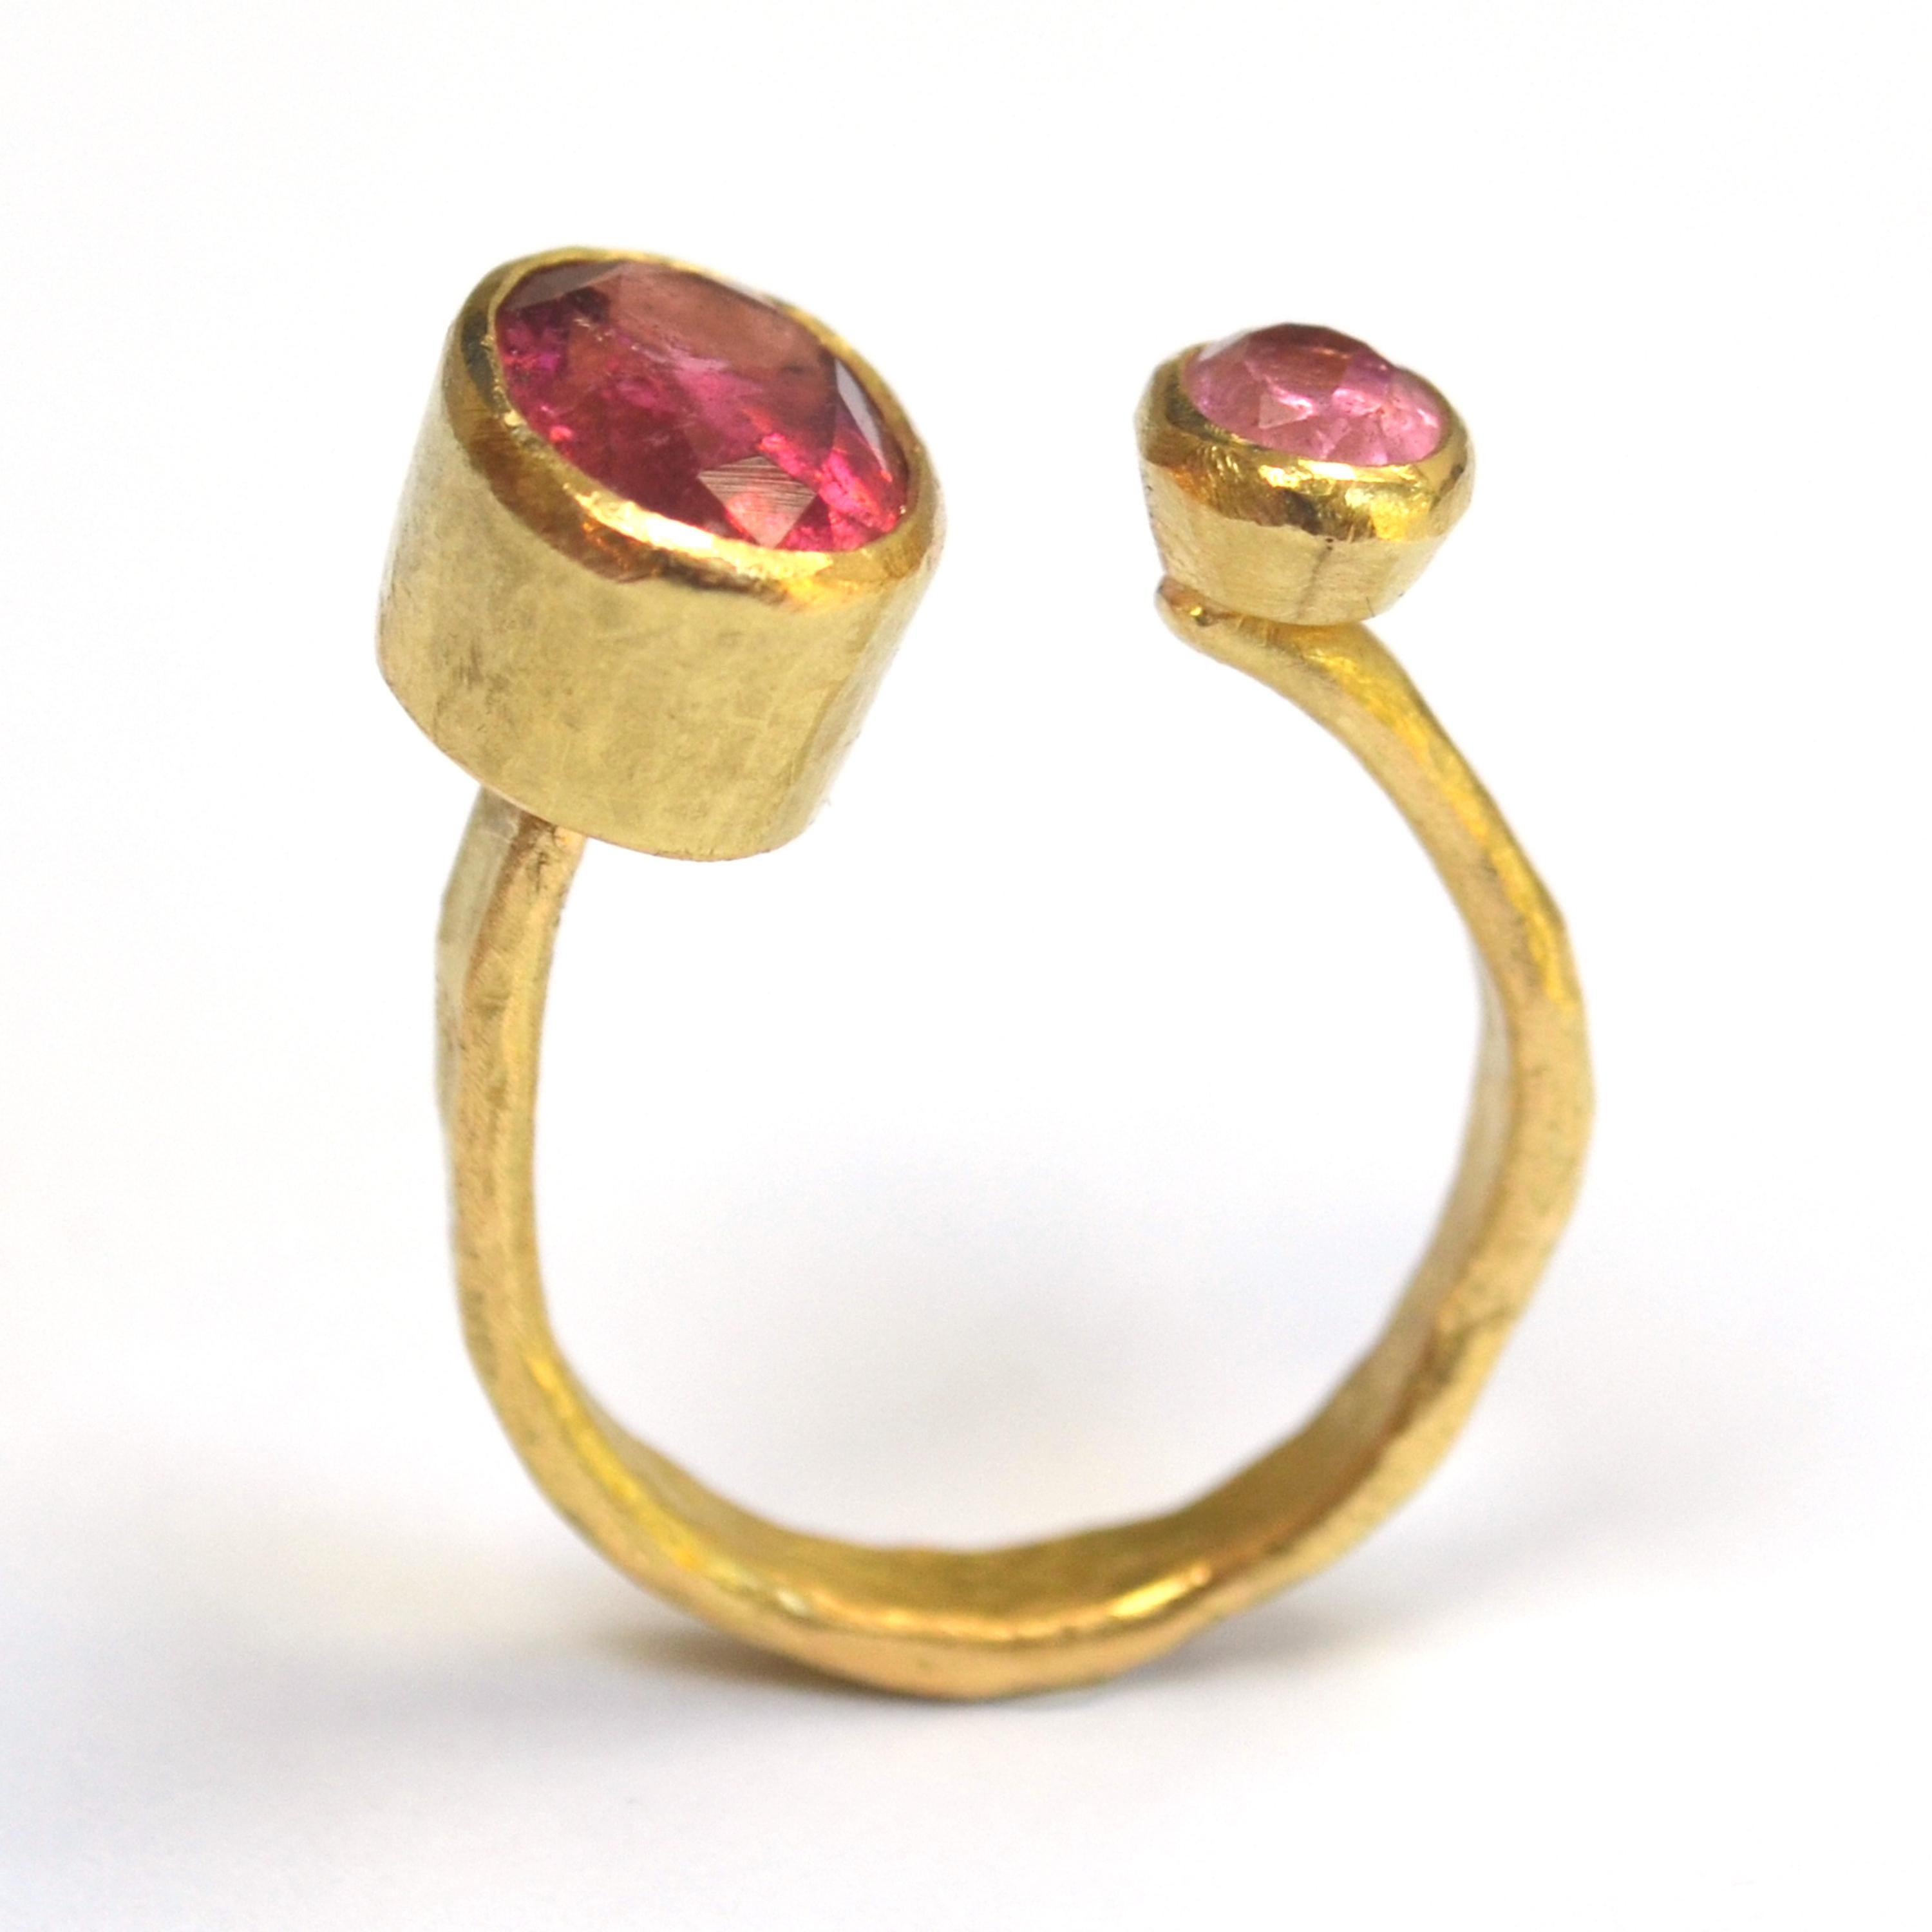 18k Gold textured open ring with two oval Pink Tourmalines, approximately 3 carats and 0.75 carats each.

This ring has been handmade by Disa Allsopp in her London Studio. Disa is inspired by ancient jewellery and uses traditional Goldsmithing